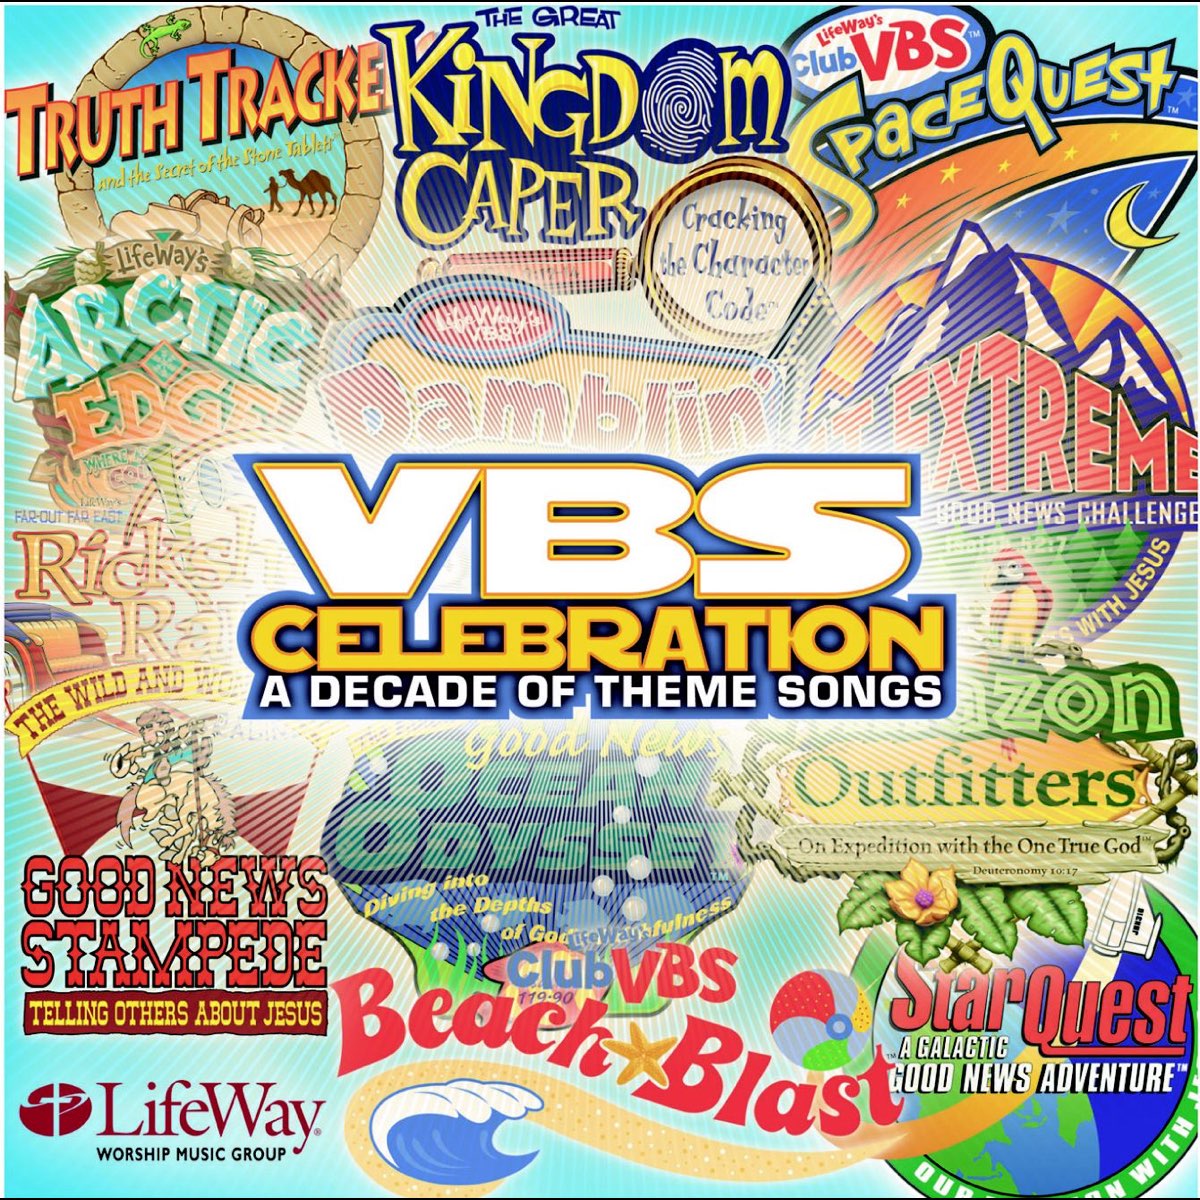 ‎VBS Celebration A Decade of Theme Songs by Jeff Slaughter on Apple Music